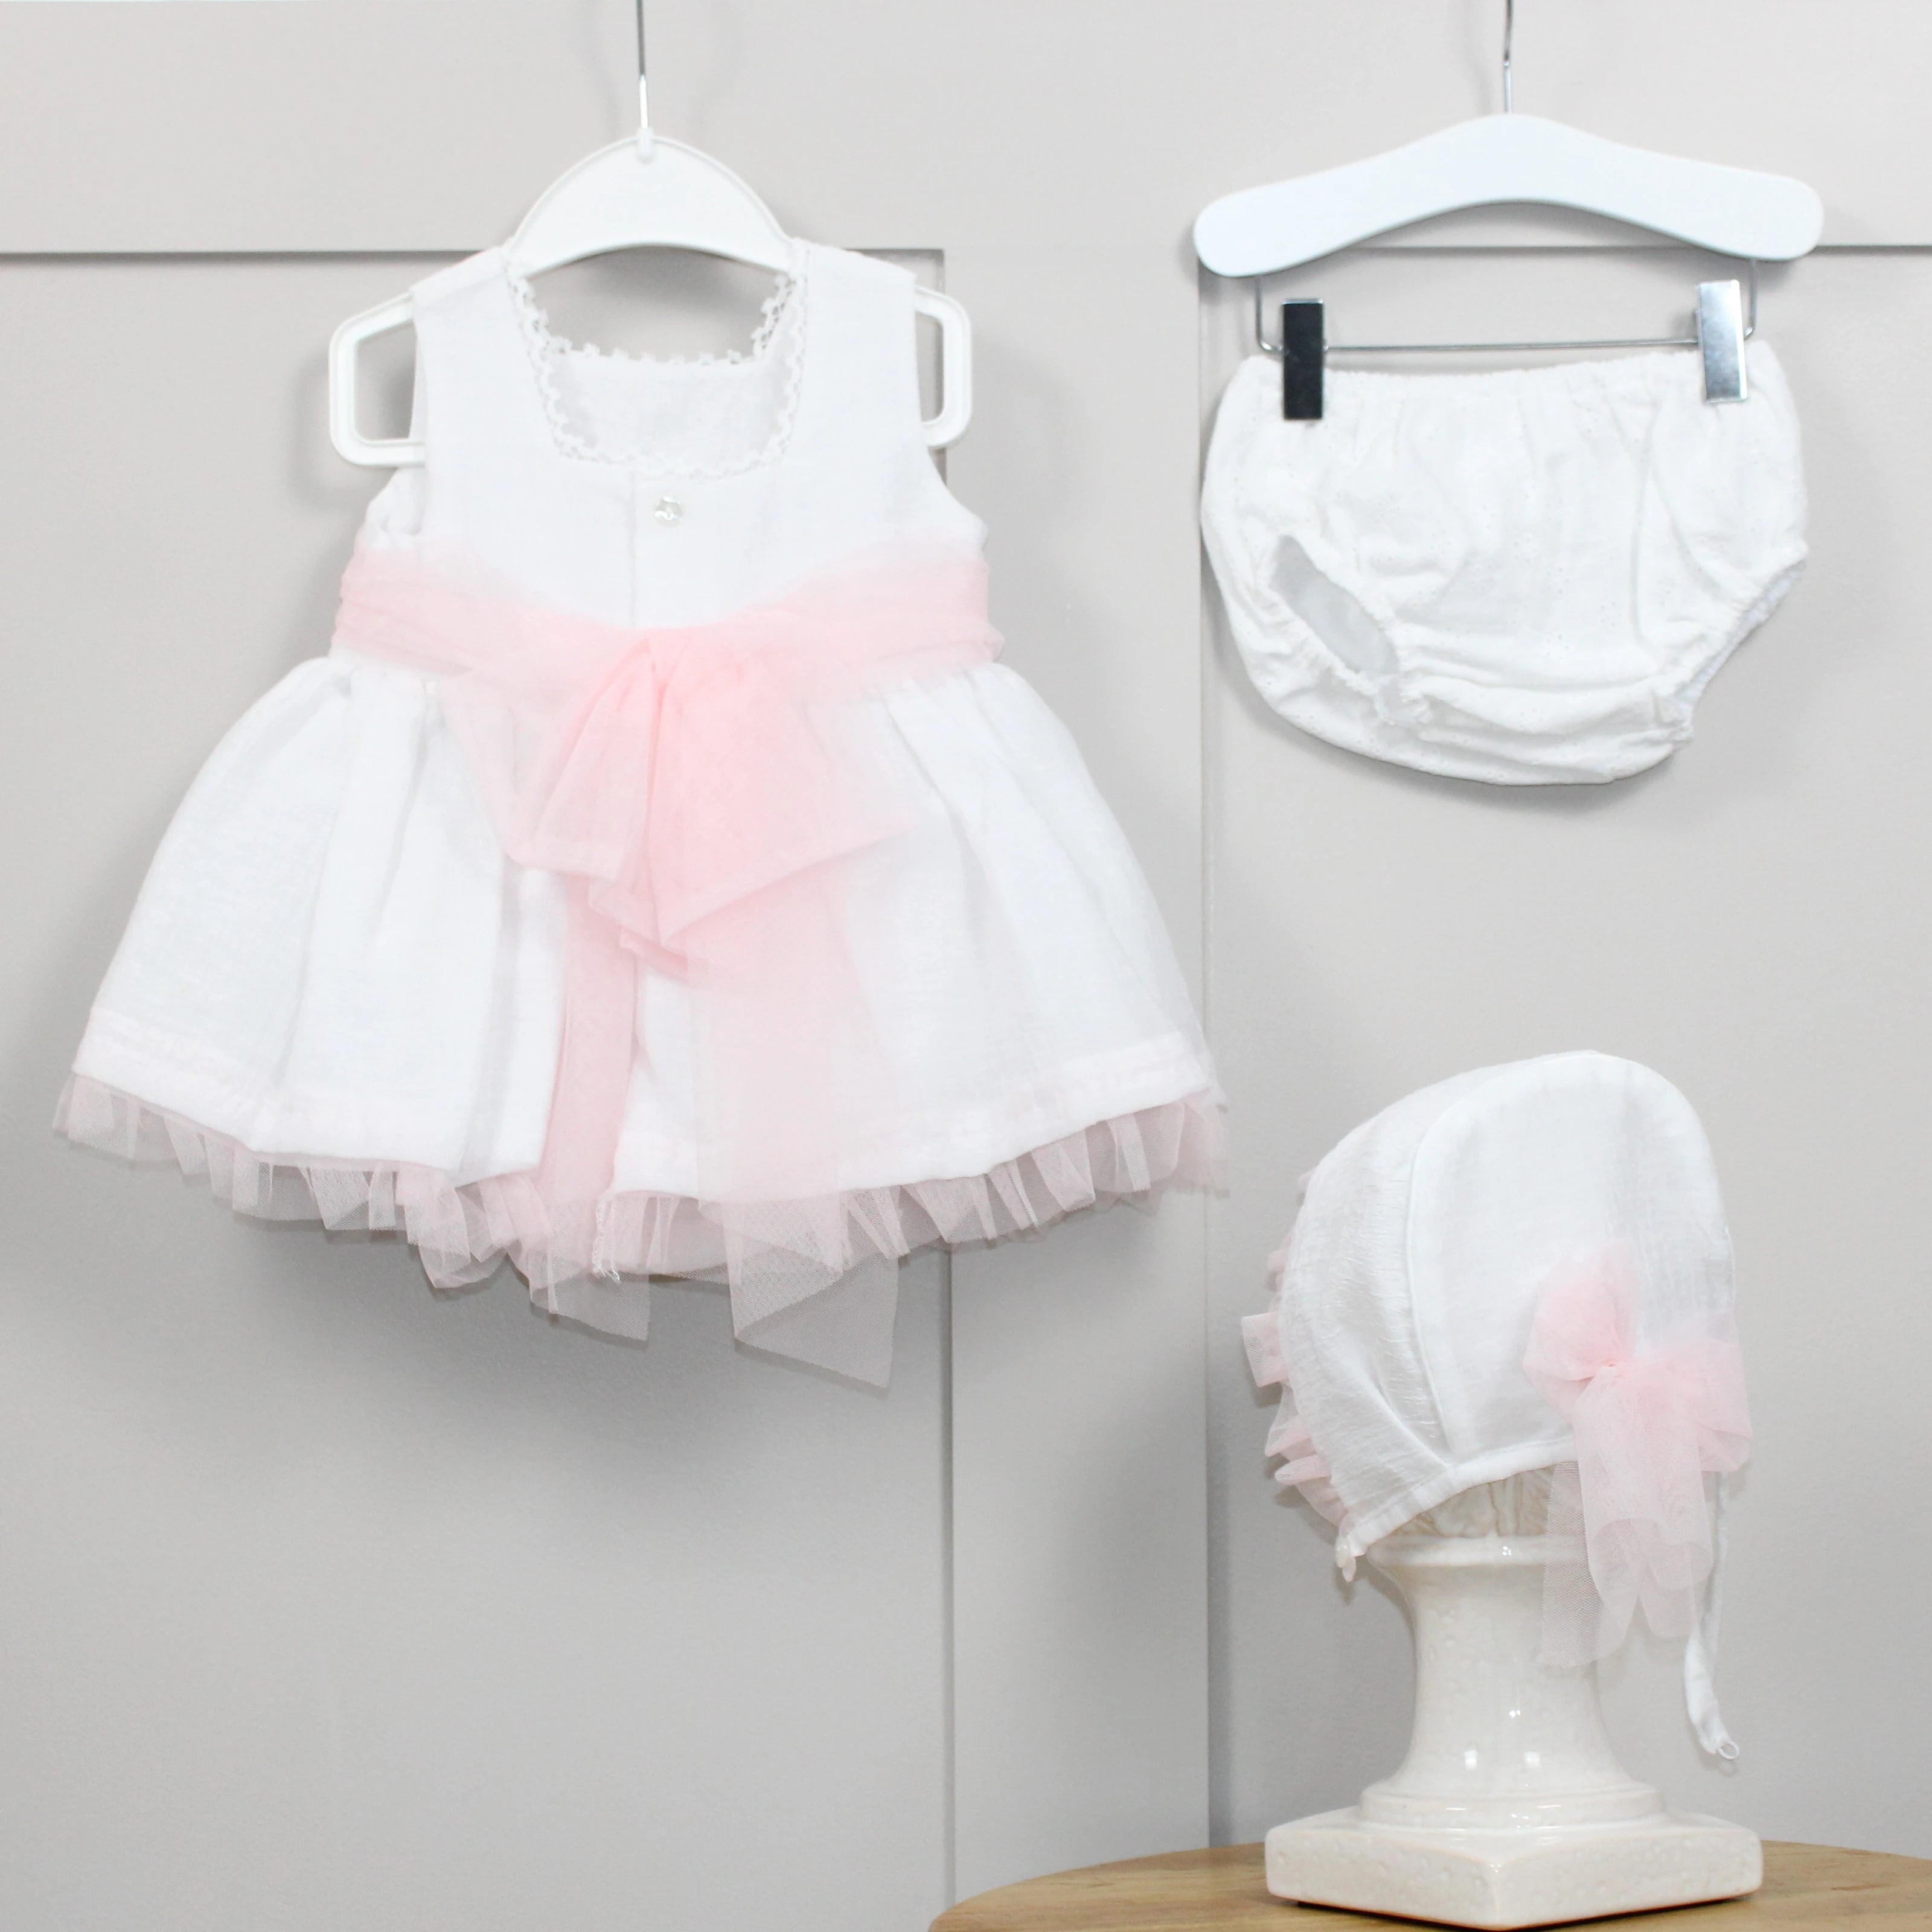 dbb collections white dress bonnet and knicker set with pink tulle sash